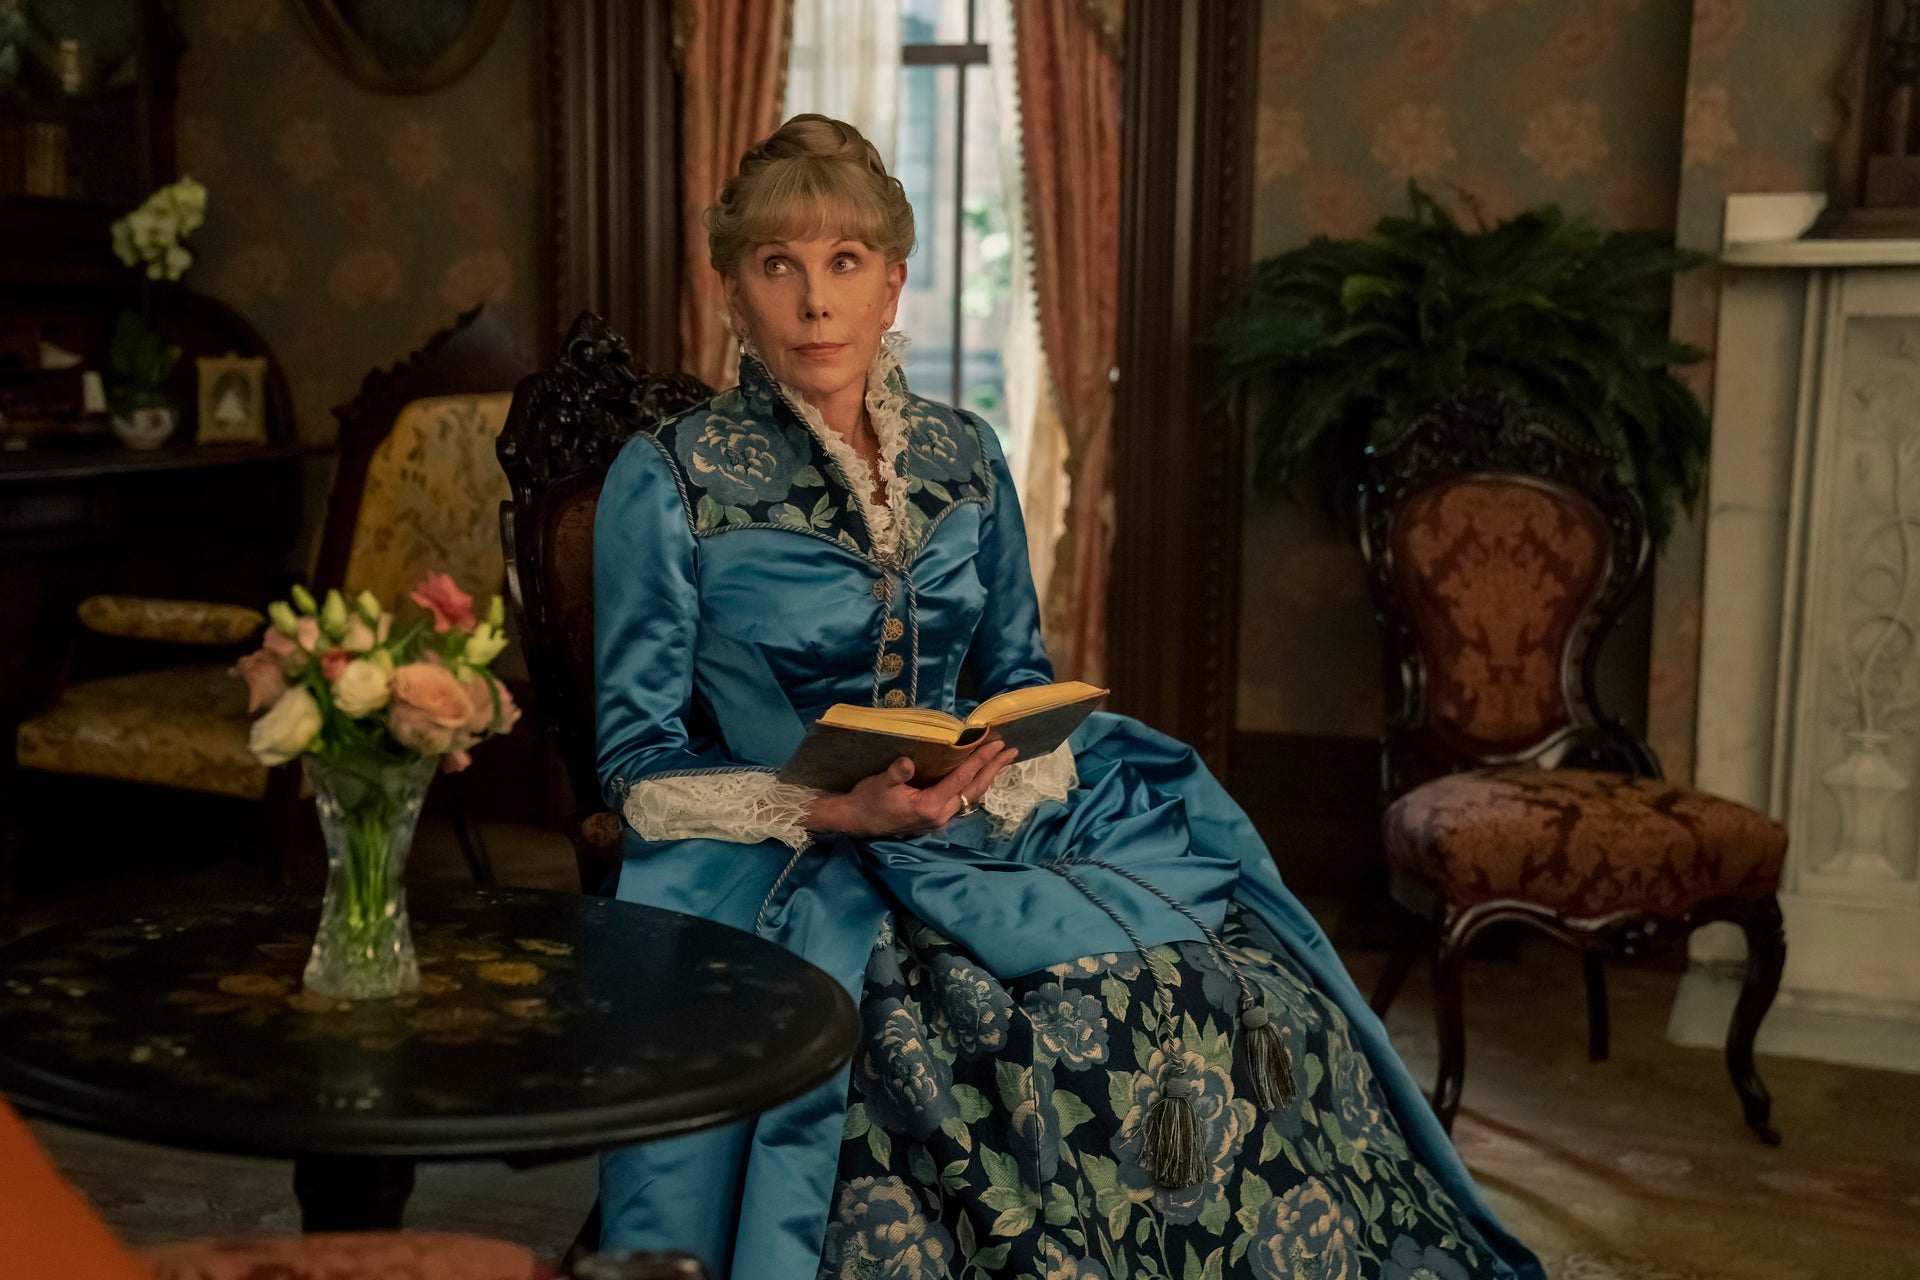 Christine Baranski as Agnes wearing a gorgeous blue dress, seated, with a book in hand.